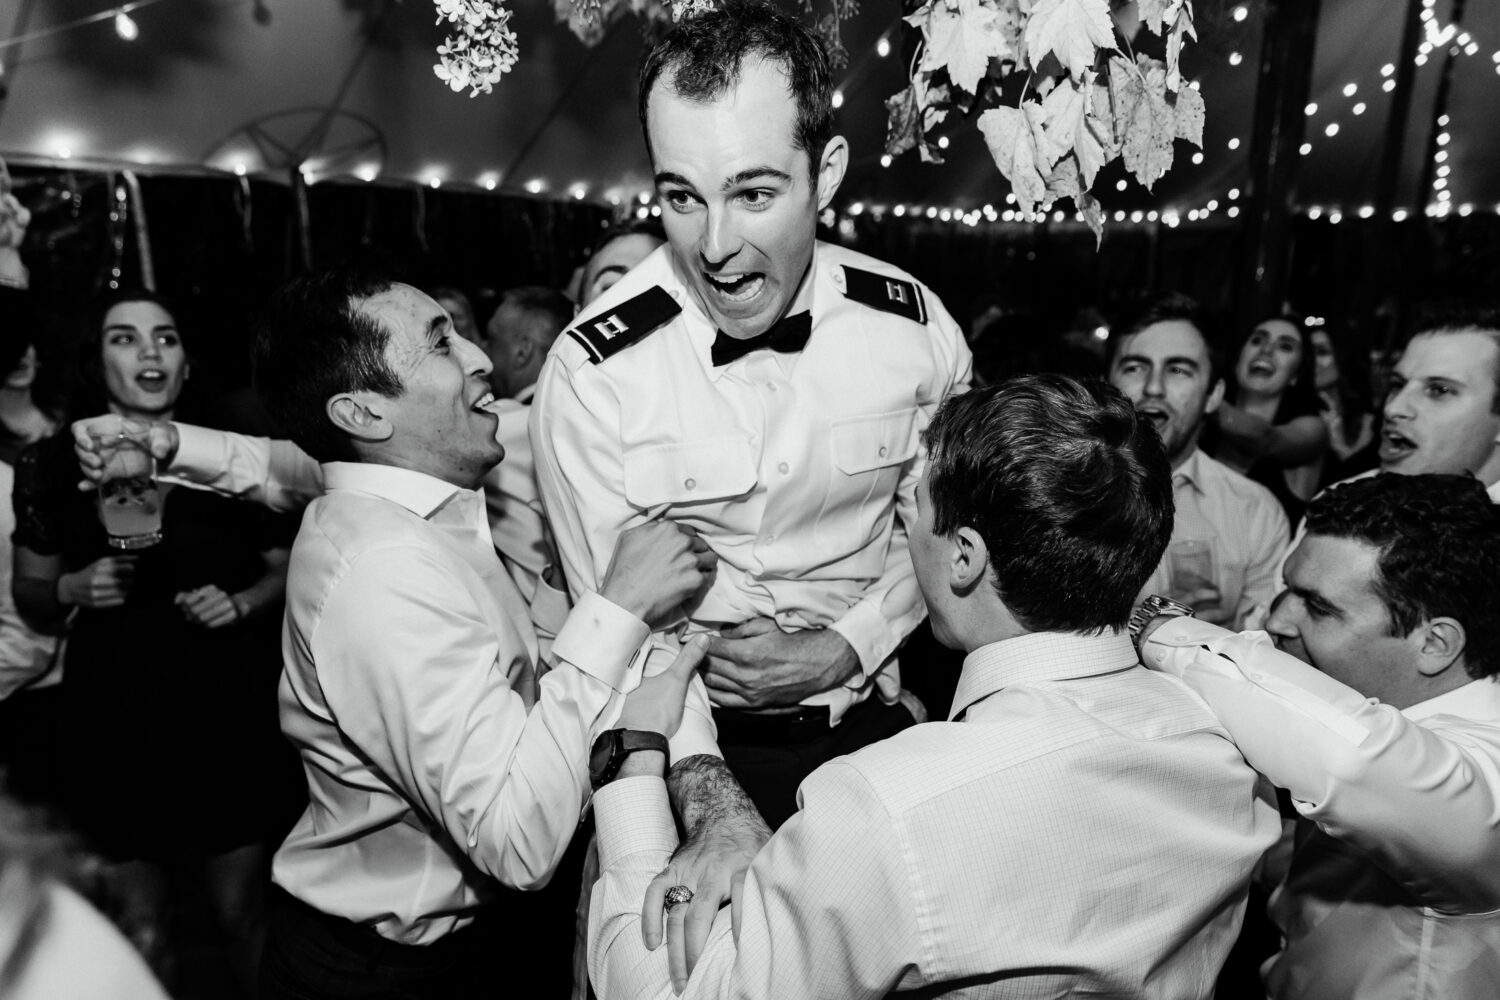 groom being lifted in the air by friends during wedding reception